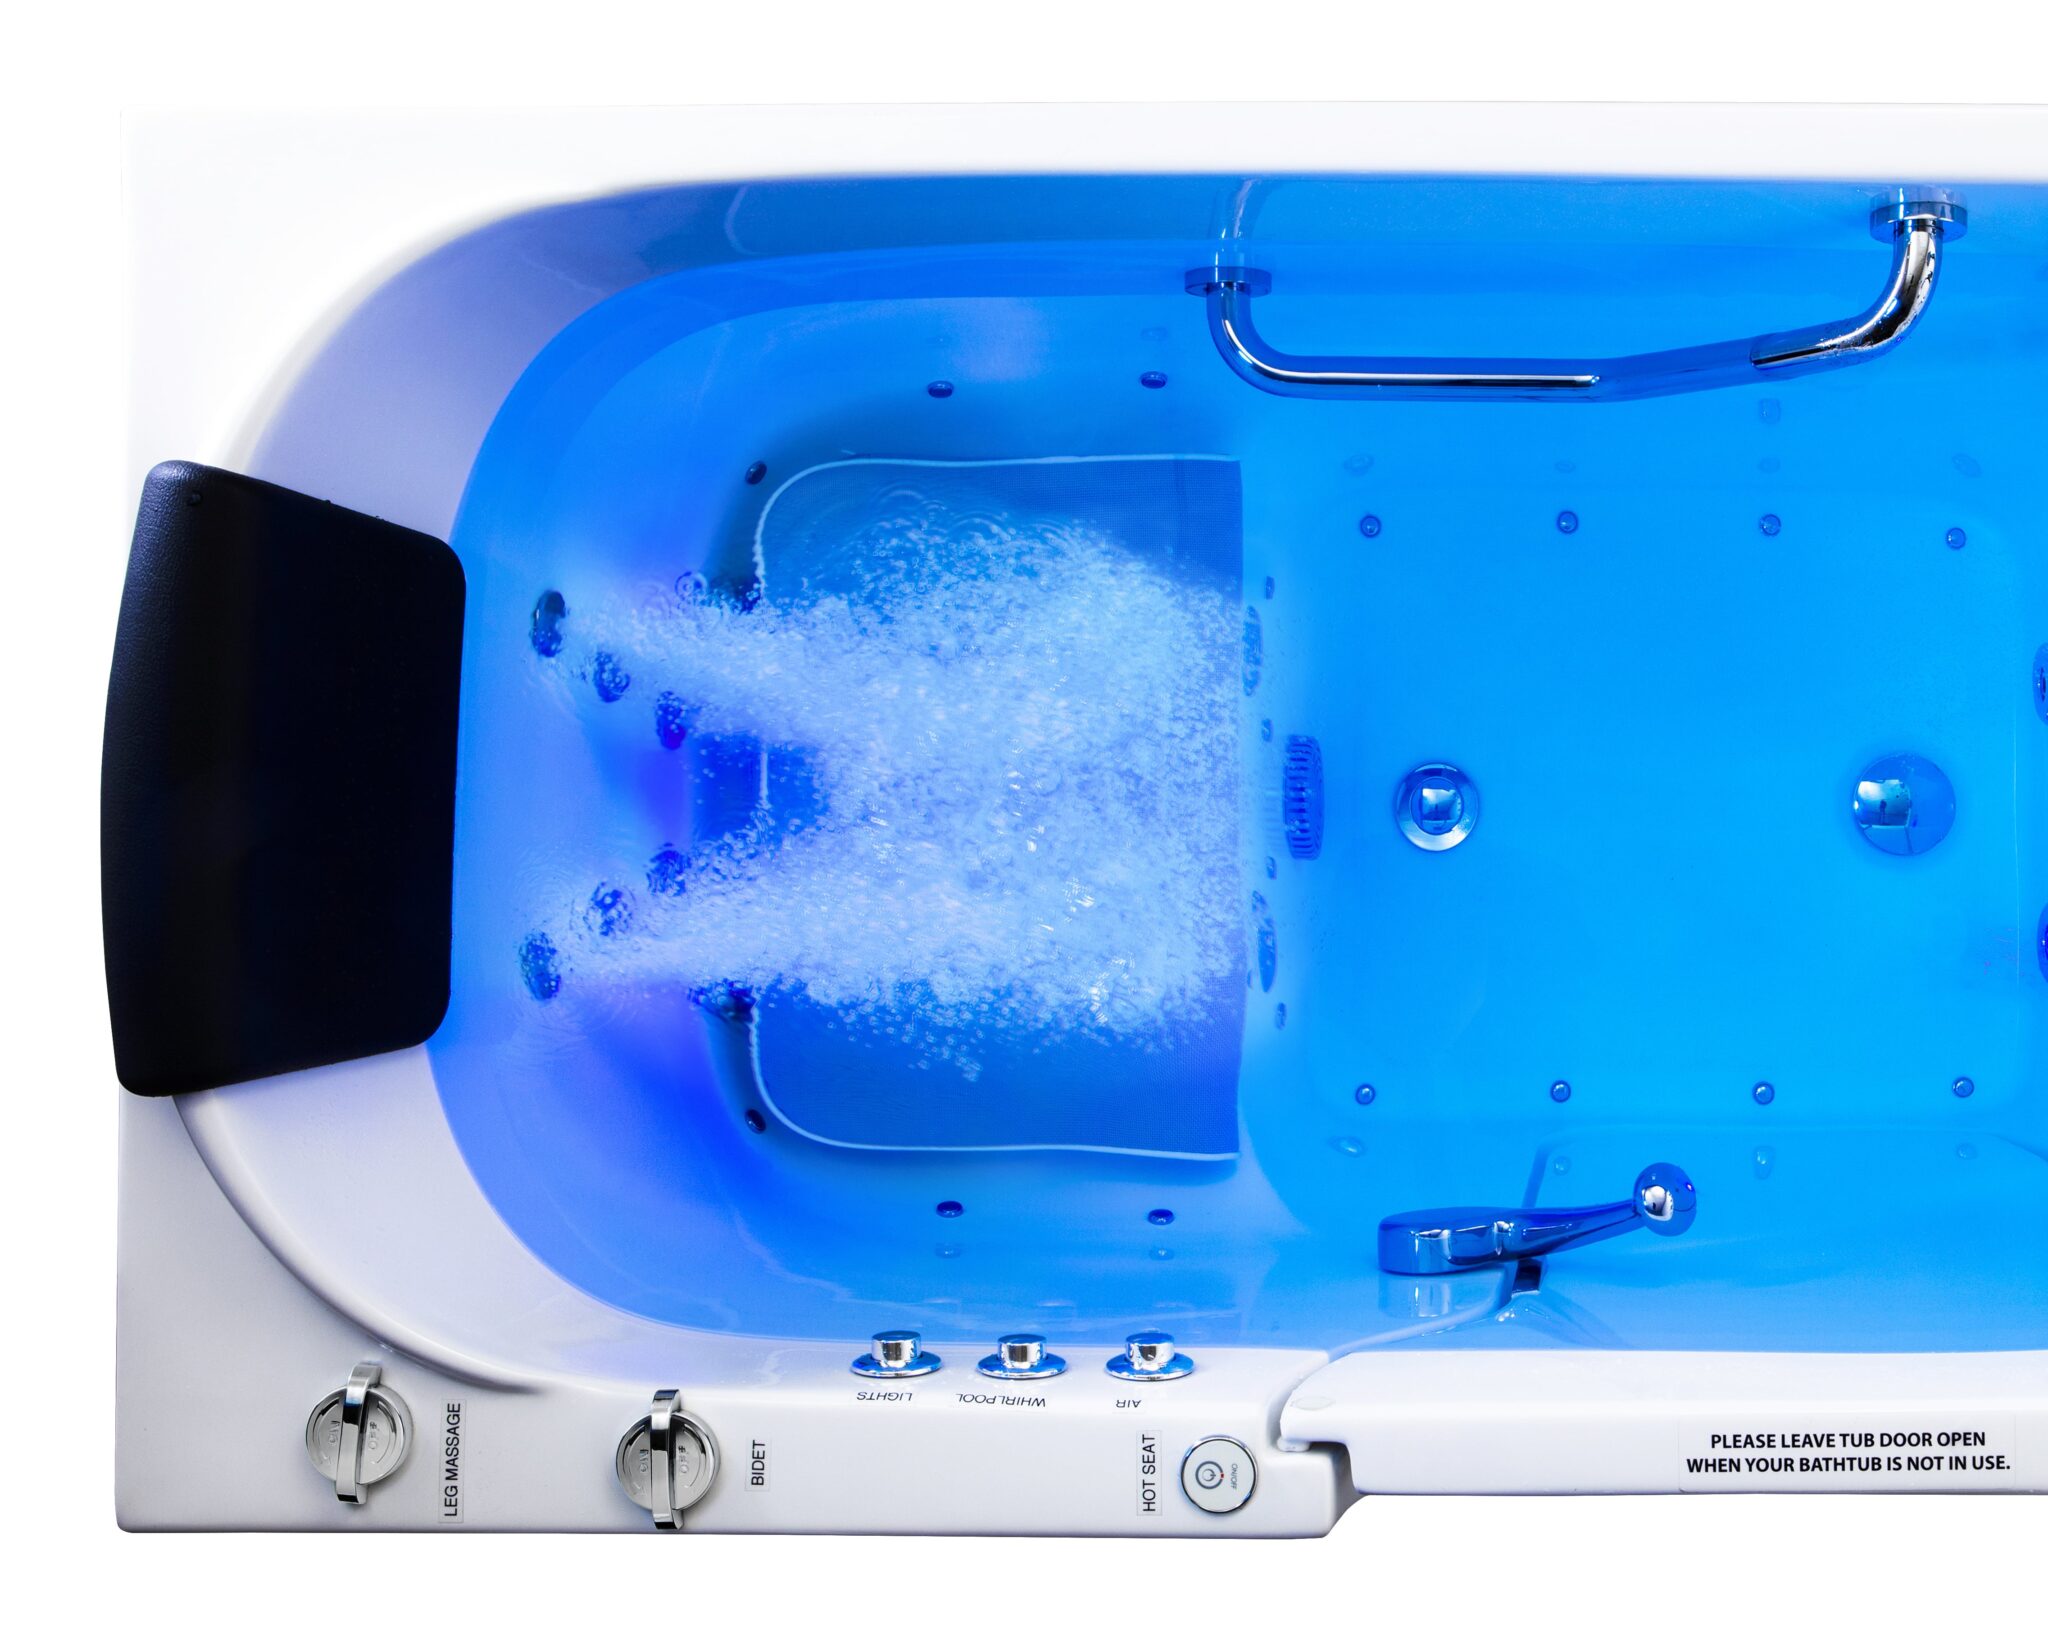 Theutic Tubs With Massage Tub, How To Use Bathtub Jets